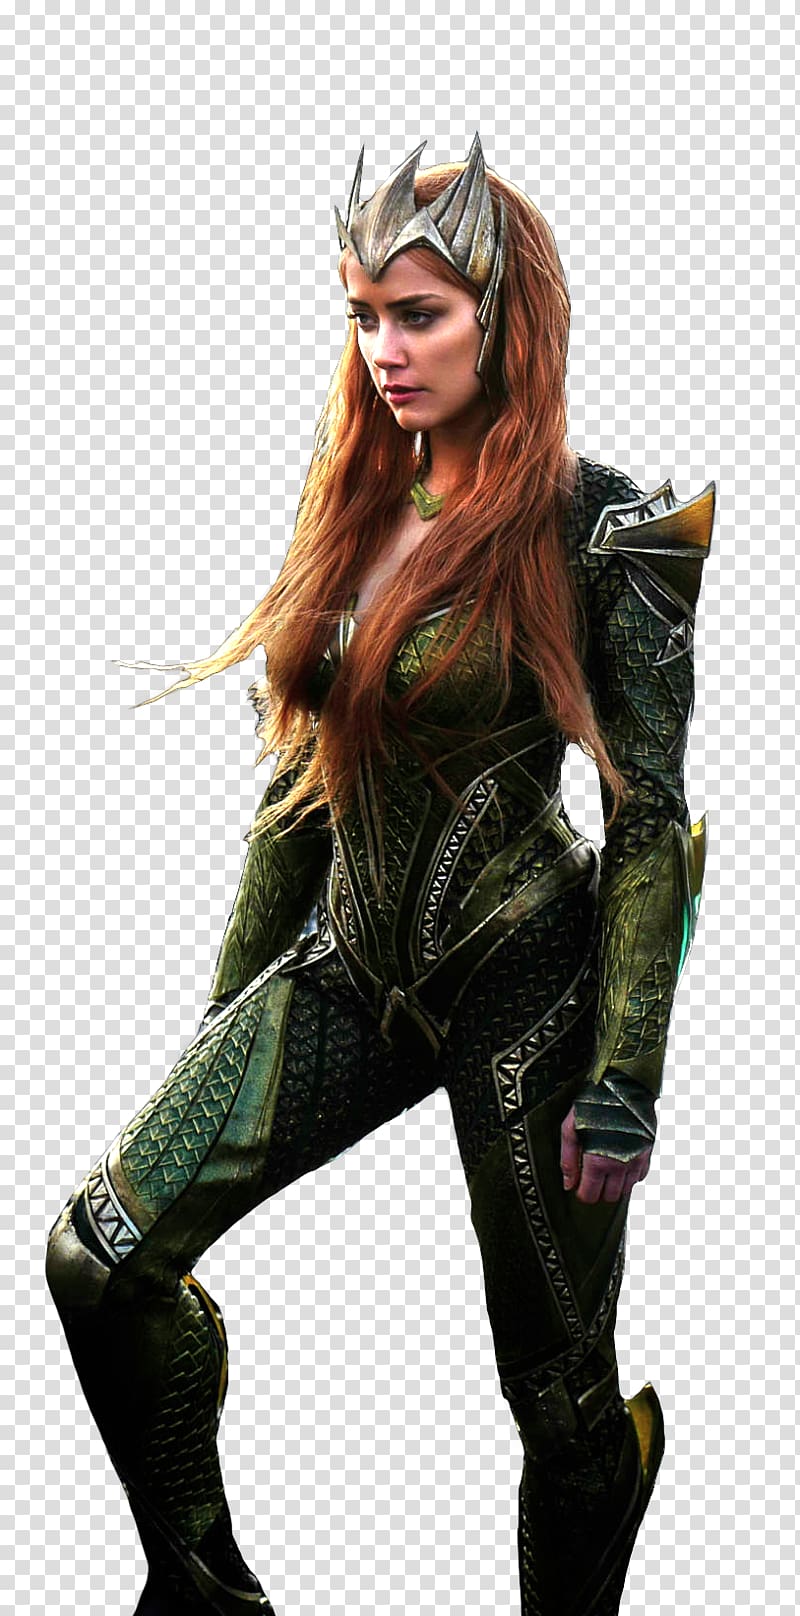 woman in green costume, Costume Character Fiction, Amber Heard File transparent background PNG clipart